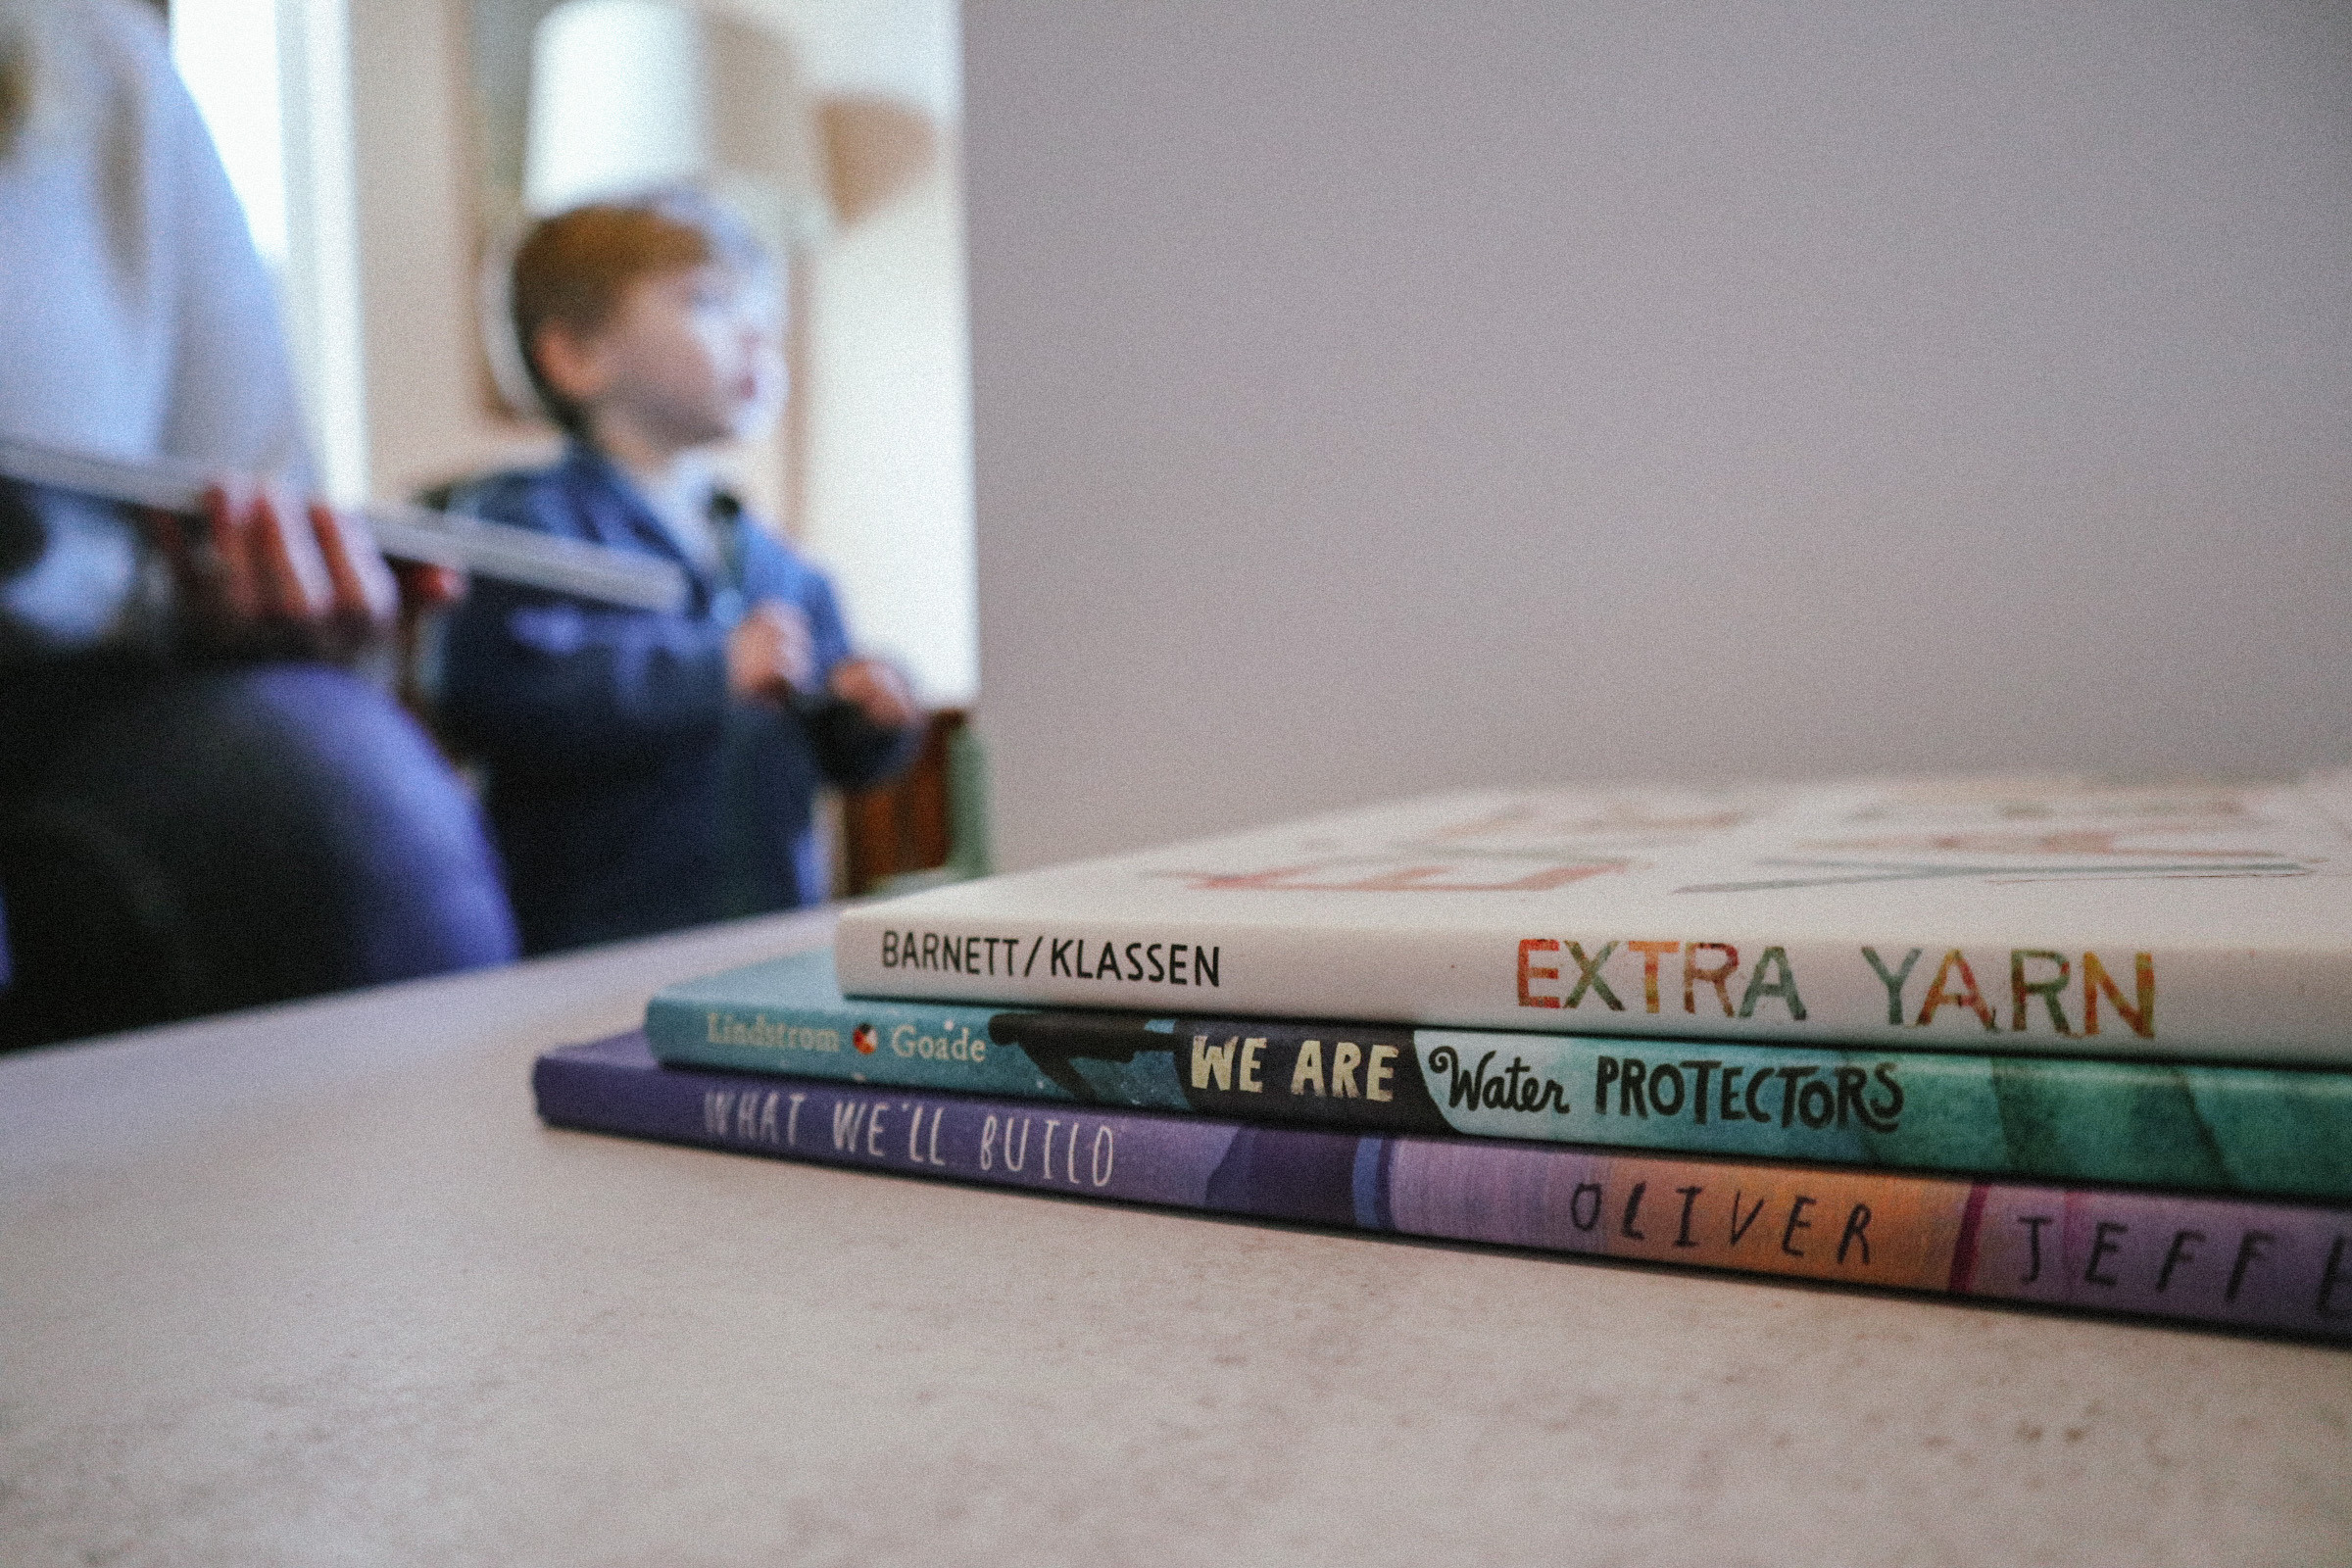 A child is out of focus in the background. In the foreground we see three children's books on a table.